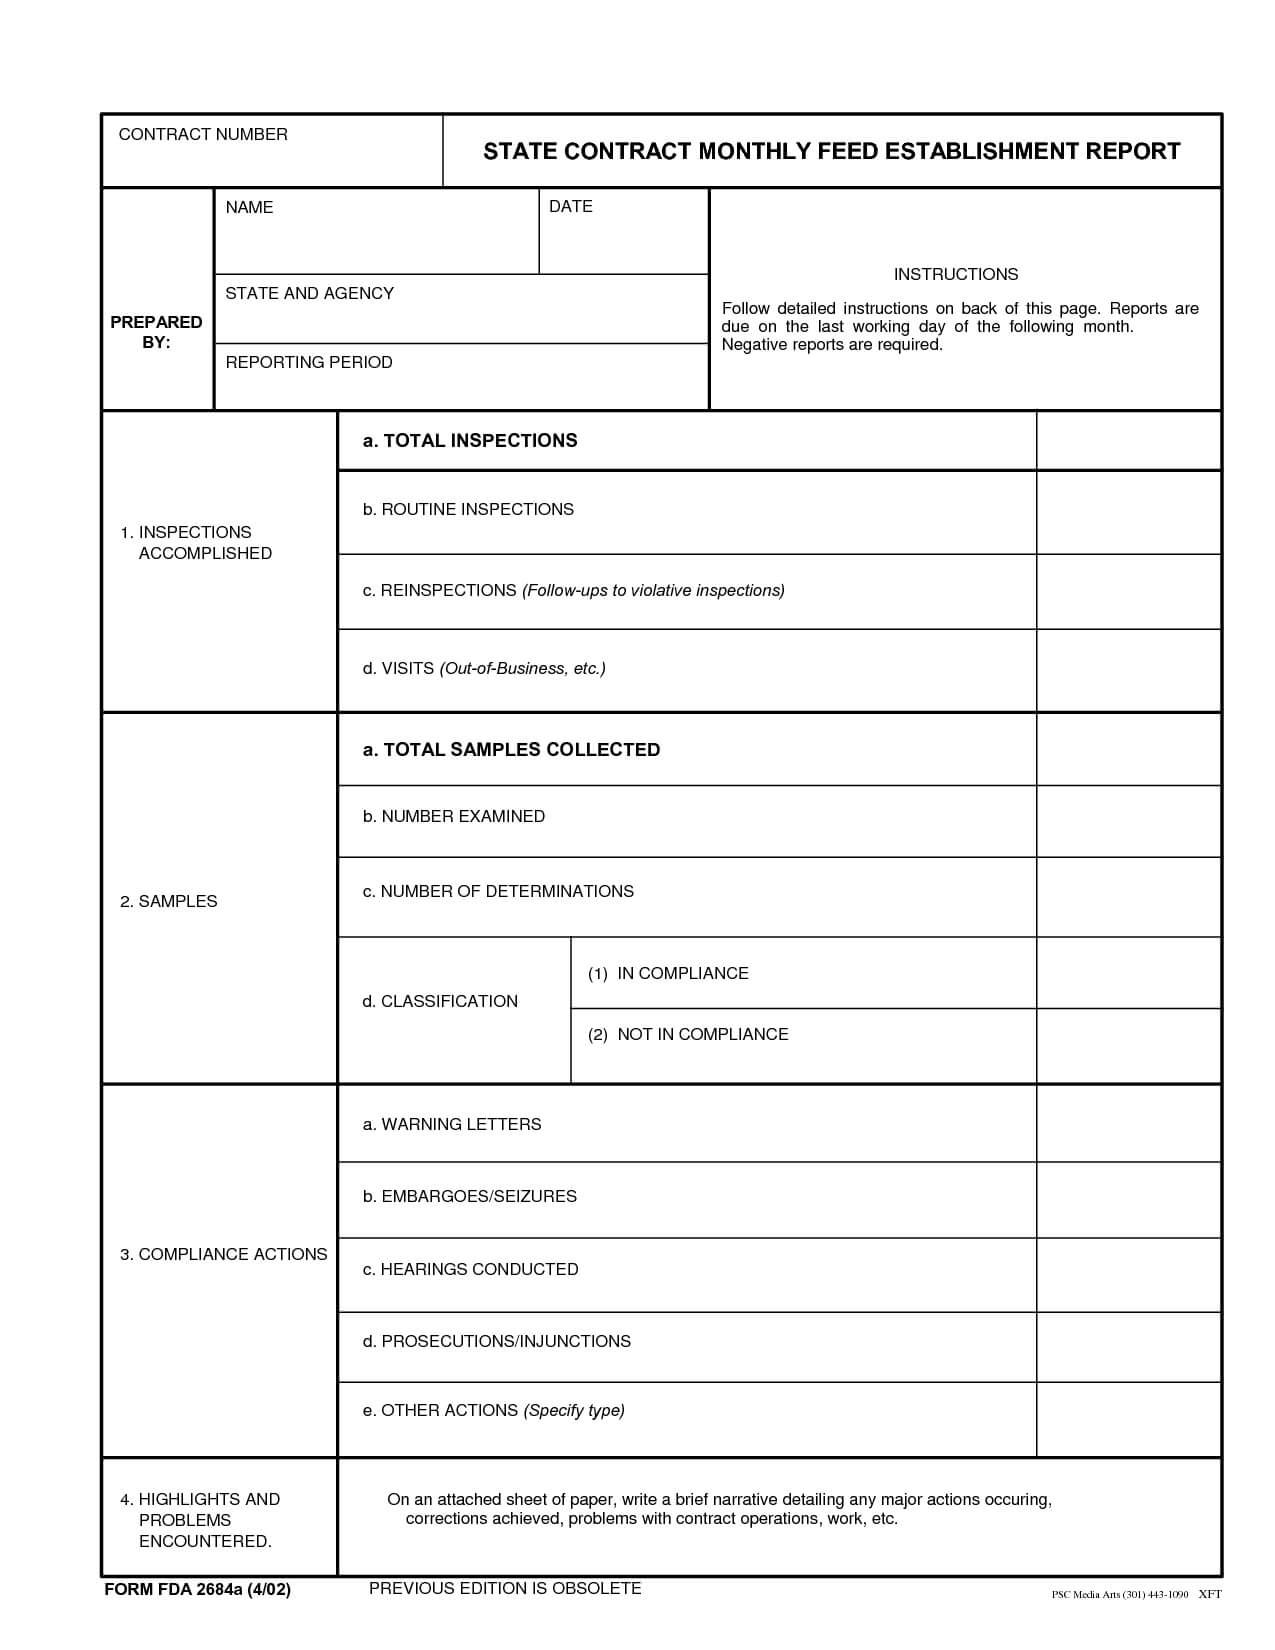 State Report Template ] - Printable Writing Templates With State Report Template